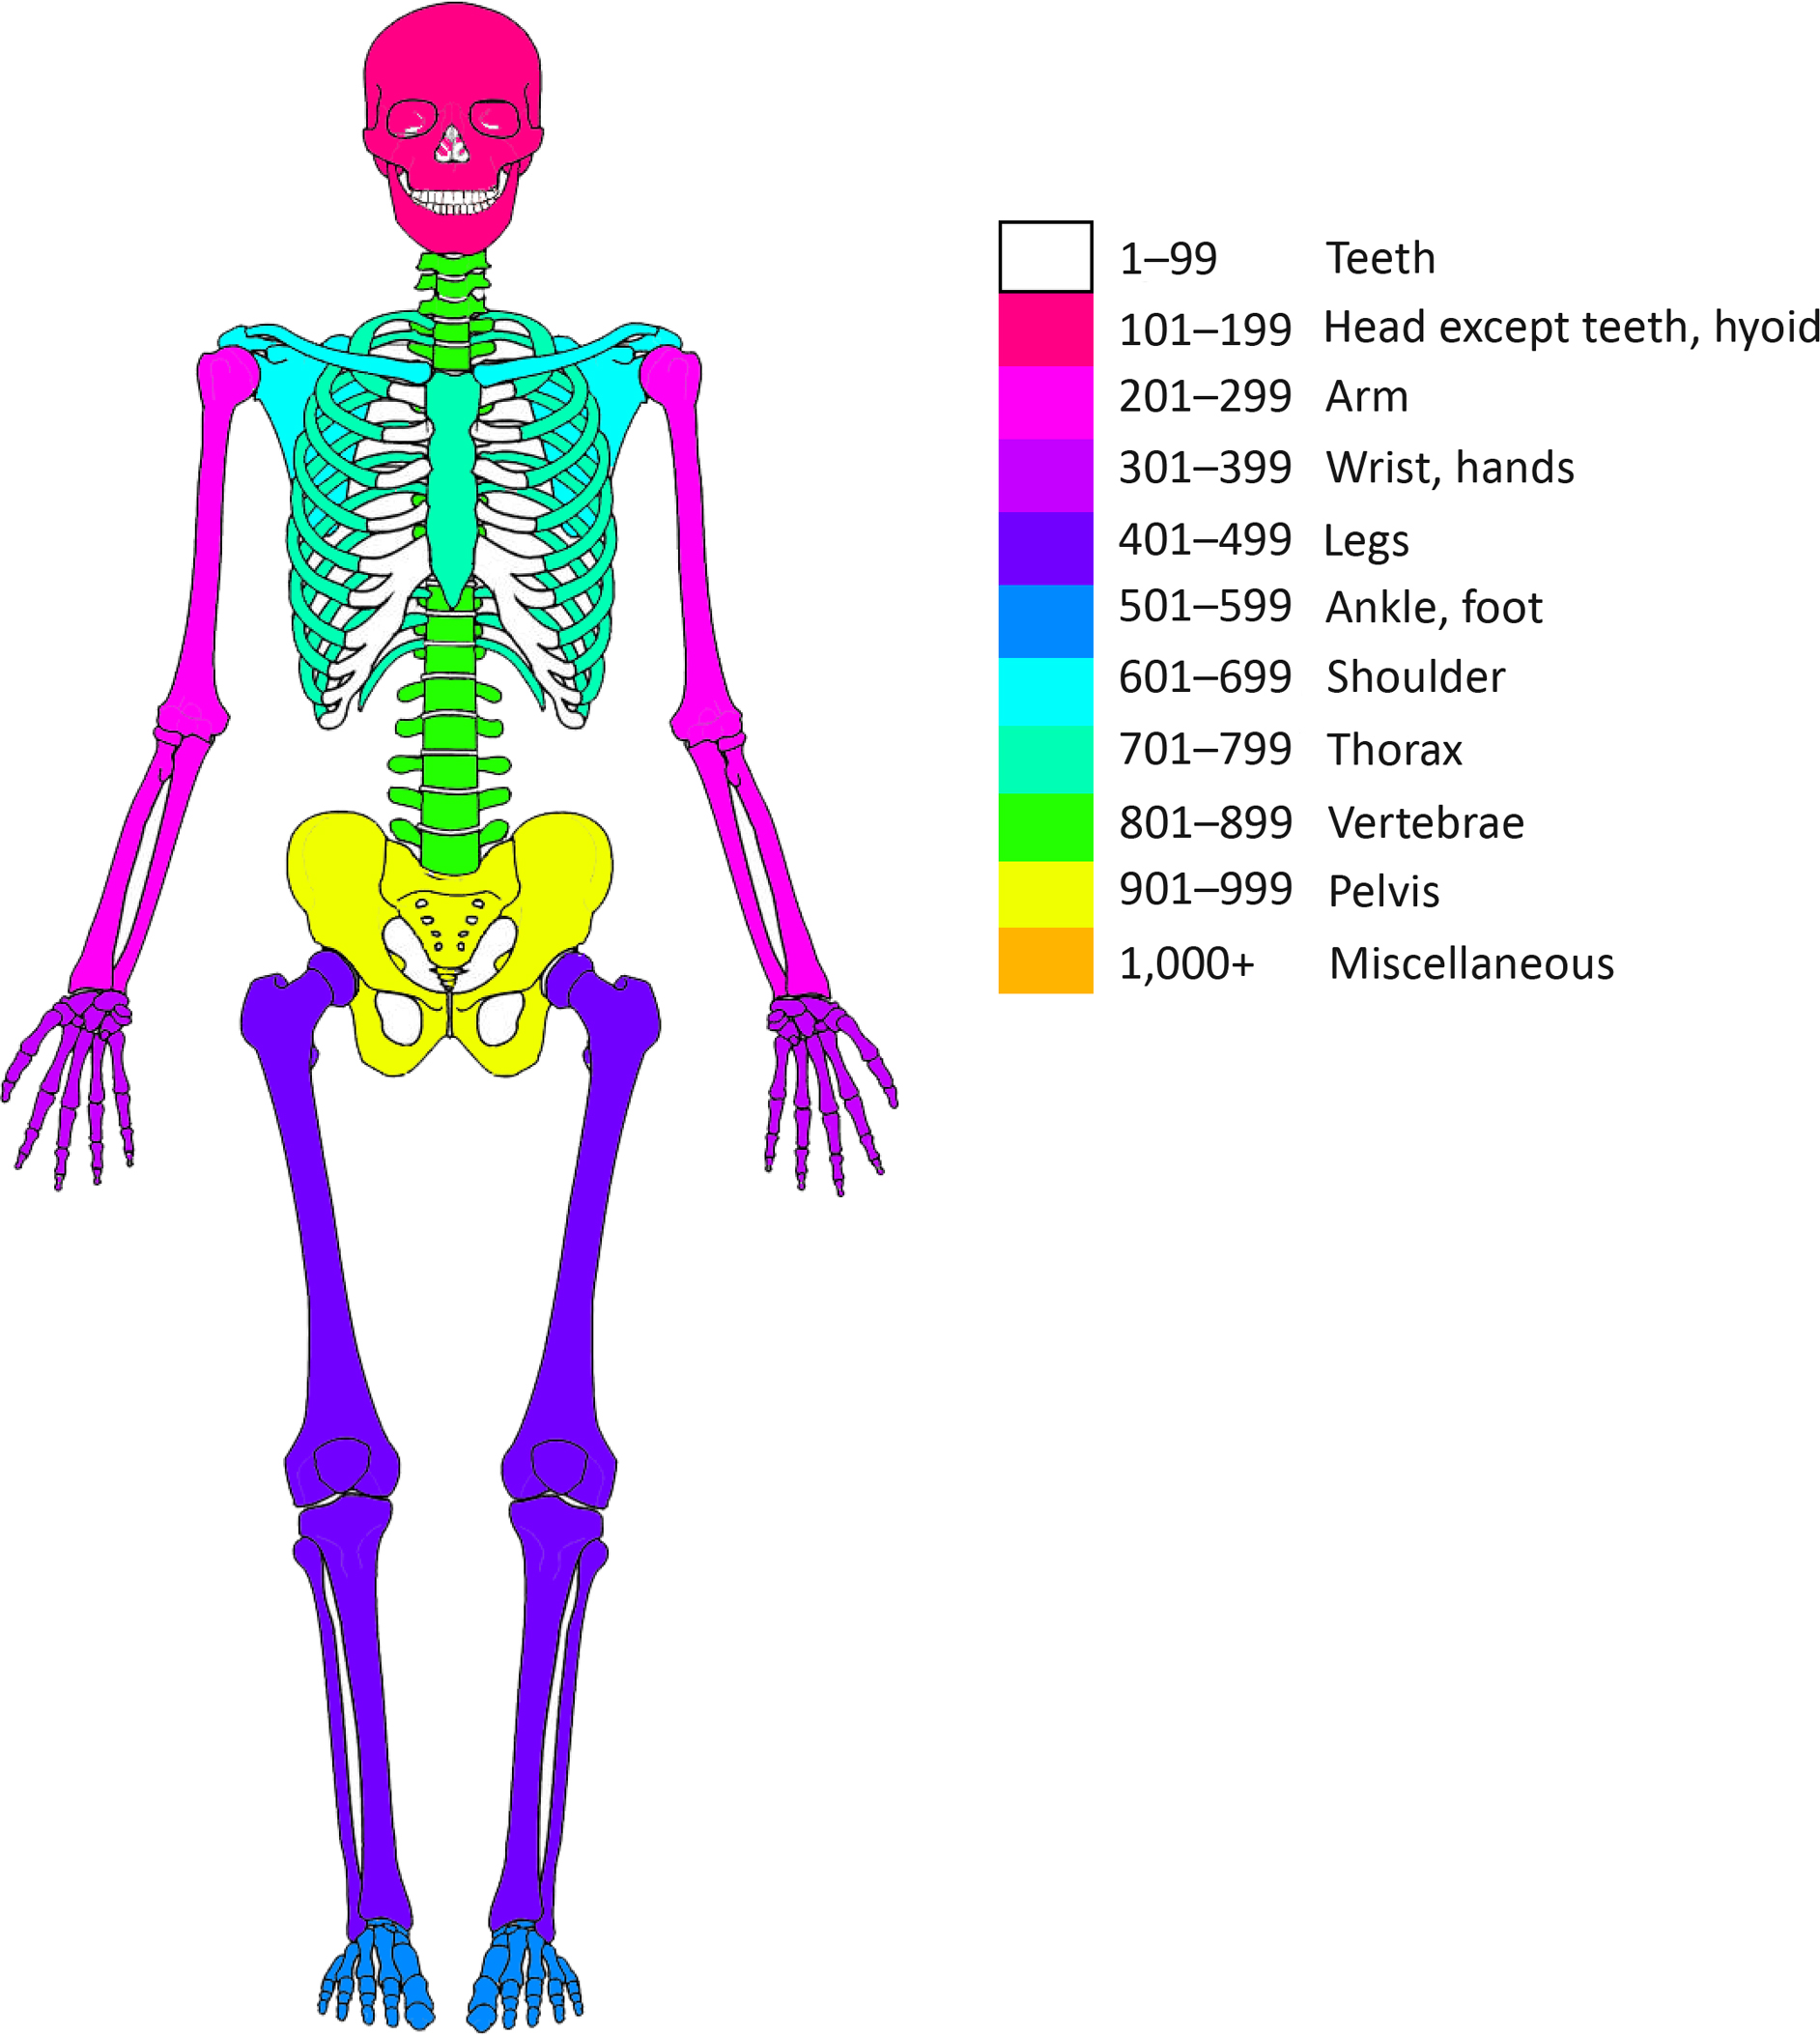 what is a major element found in the teeth and bones of vertebrates